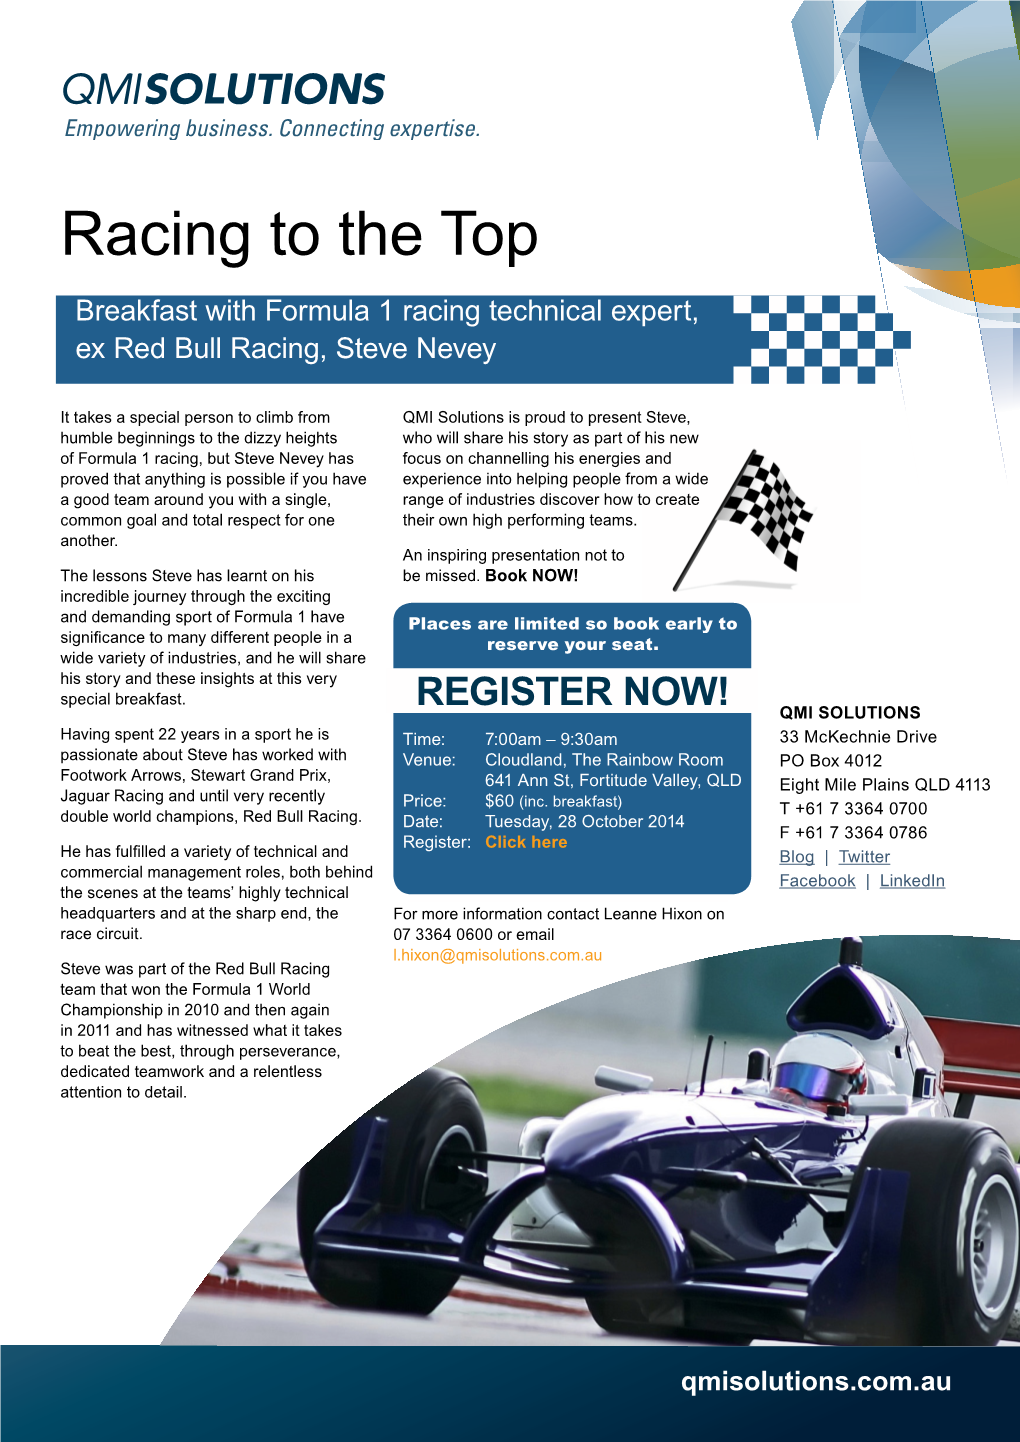 Racing to the Top Breakfast with Formula 1 Racing Technical Expert, Ex Red Bull Racing, Steve Nevey